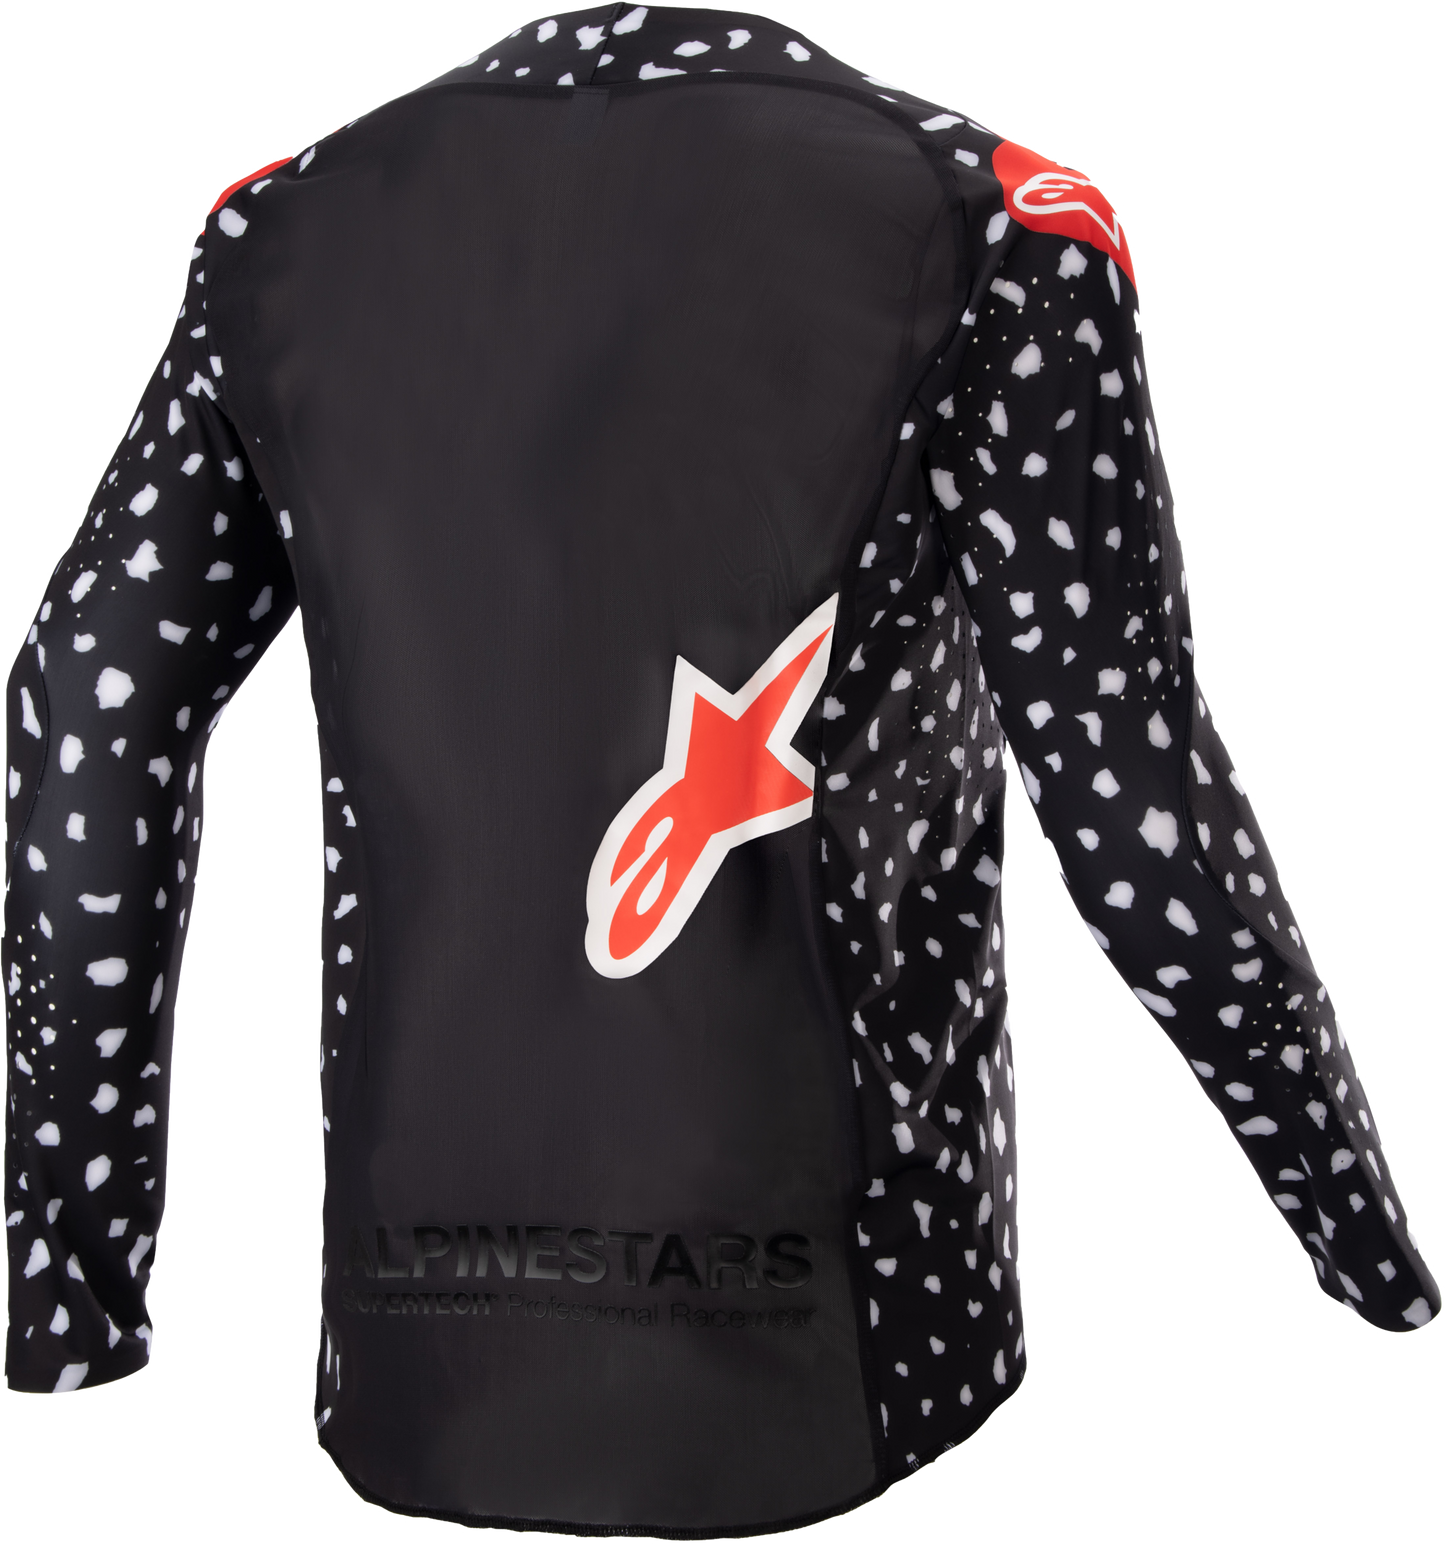 YOUTH RACER NORTH JERSEY BLACK/NEON RED